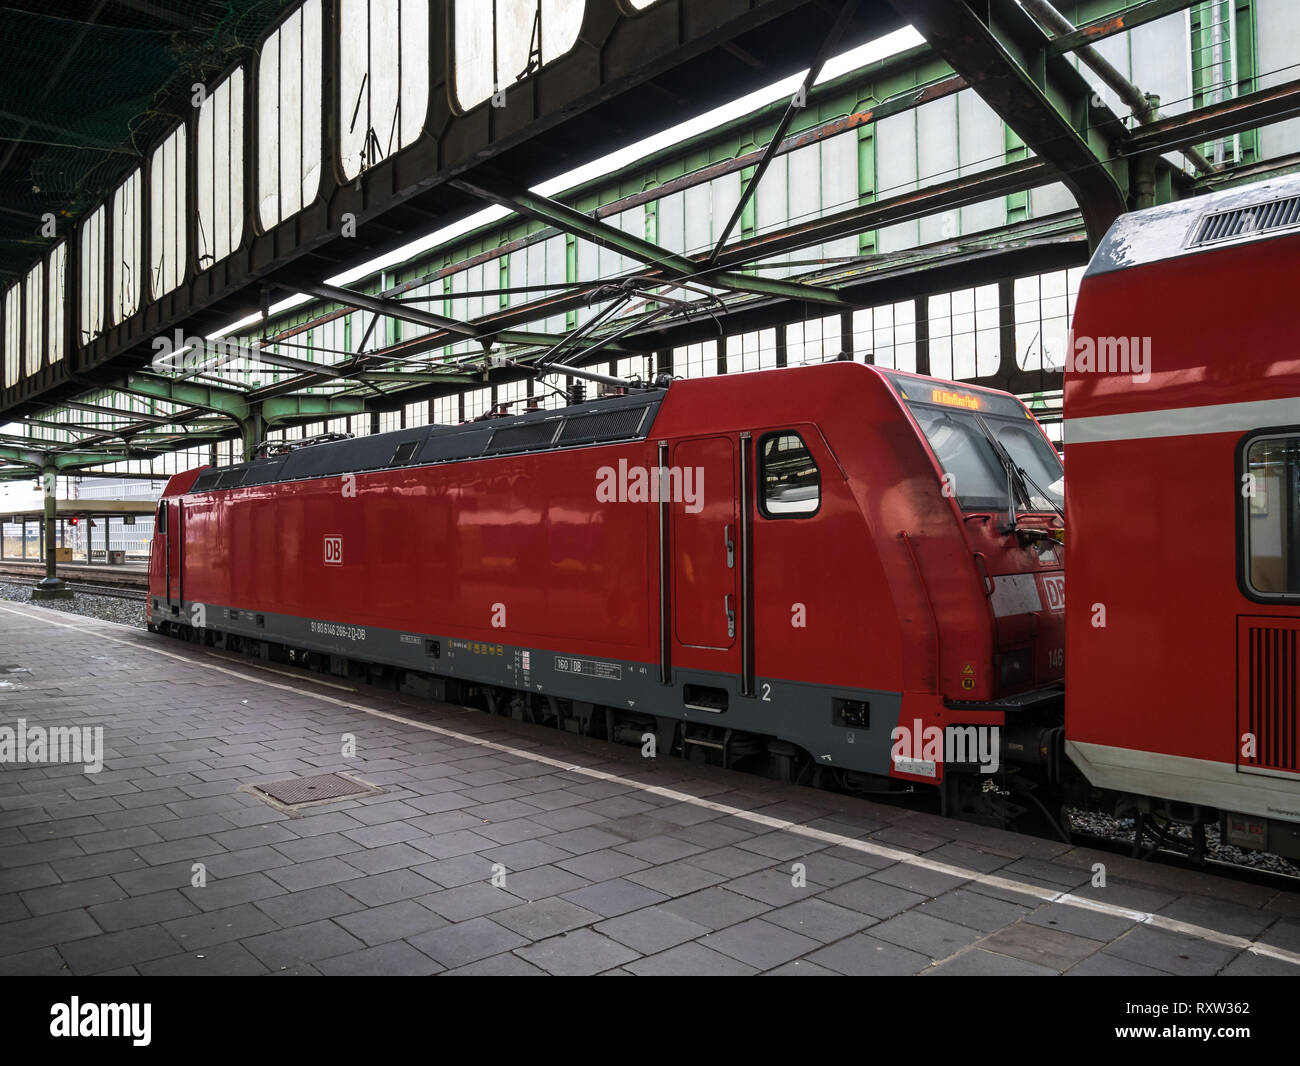 Locomotive of a regional train in Duisburg Central Station, Germany Stock Photo